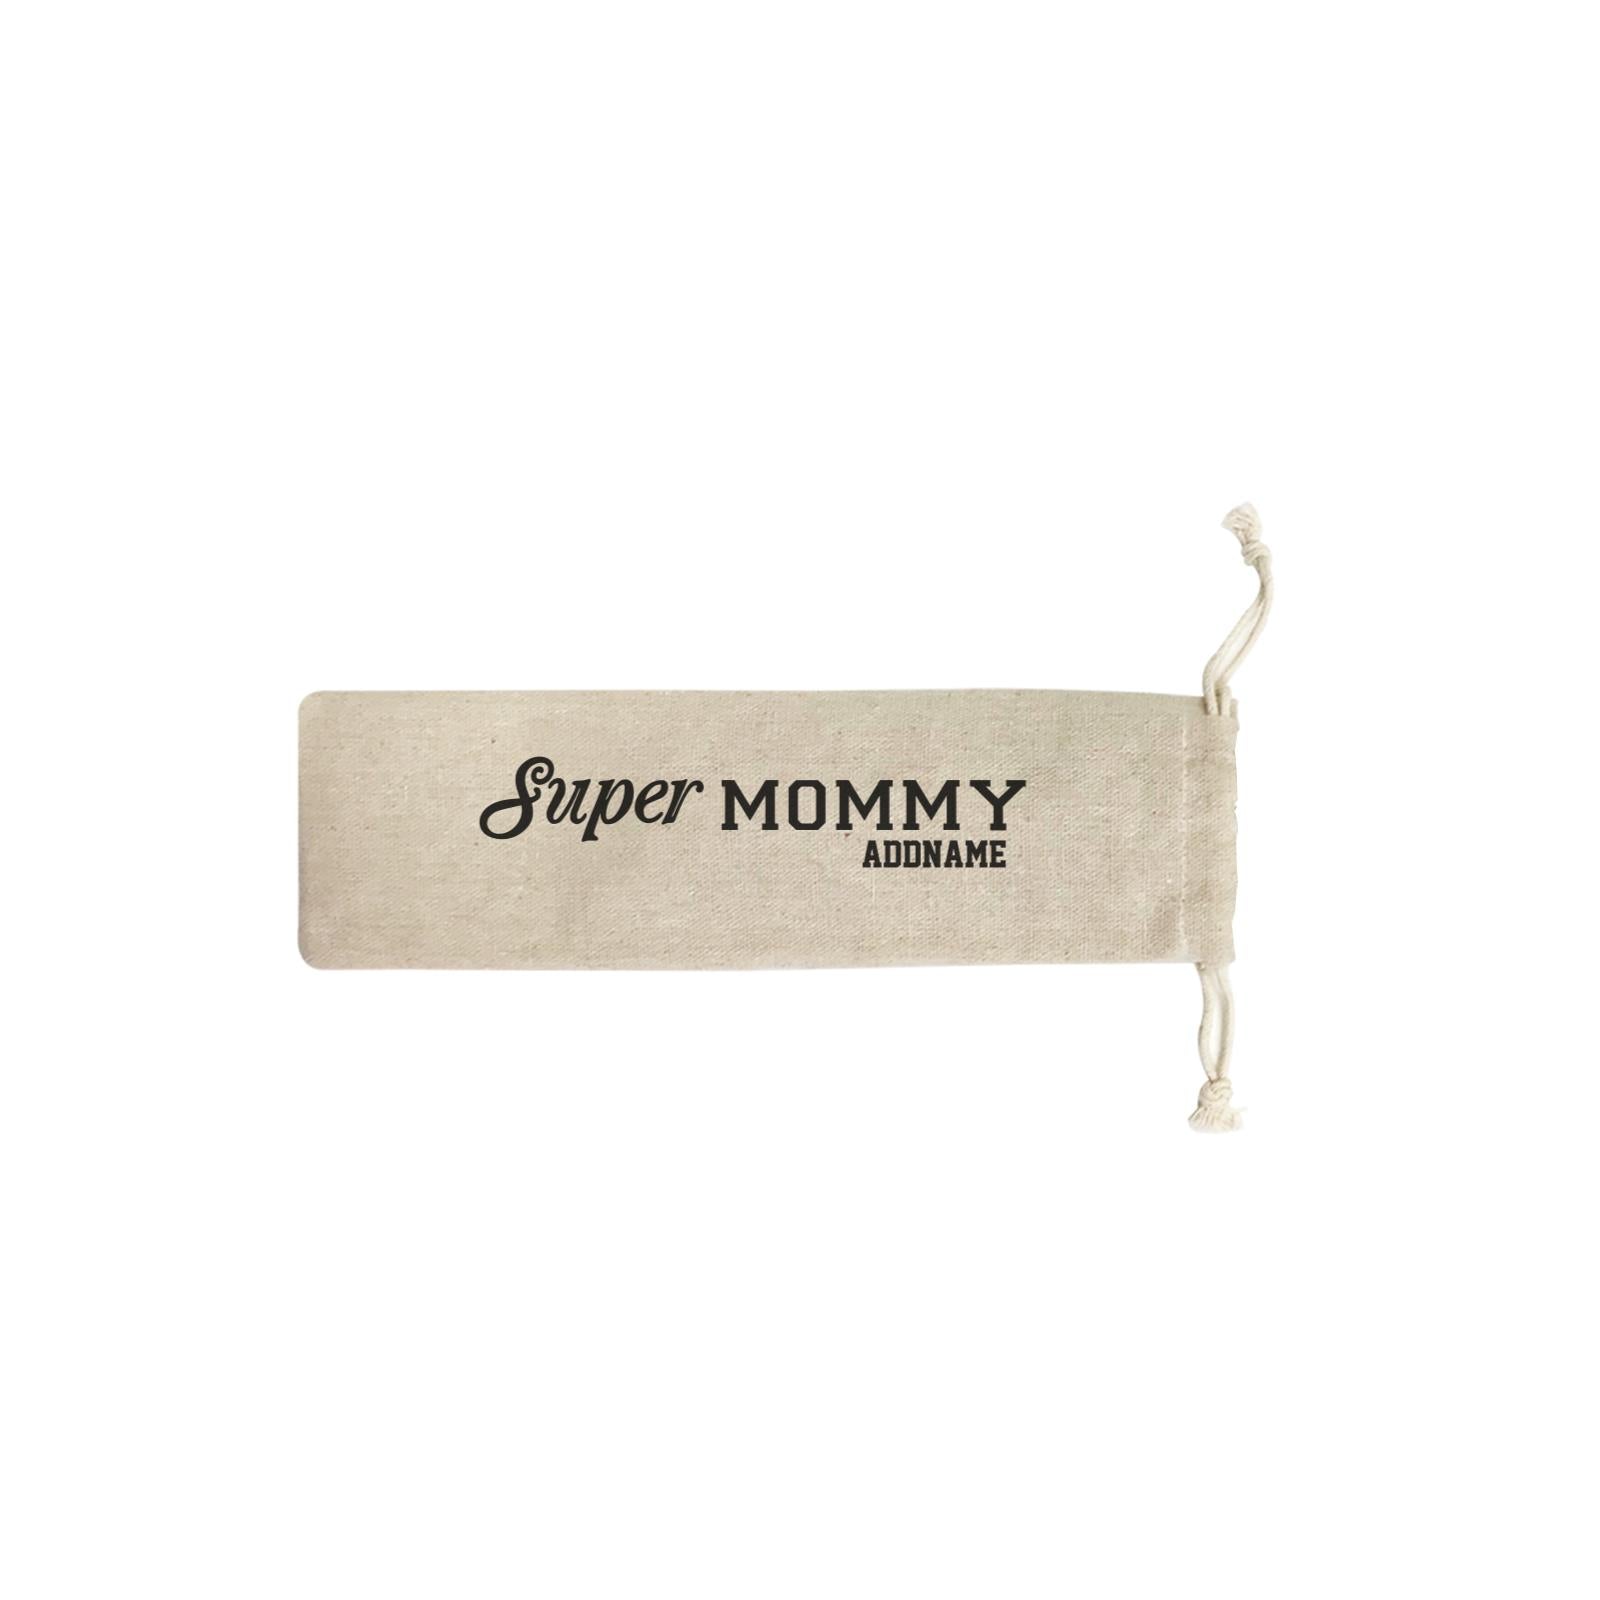 Super Definition Family Super Mommy Addname SB Straw Pouch (No Straws included)